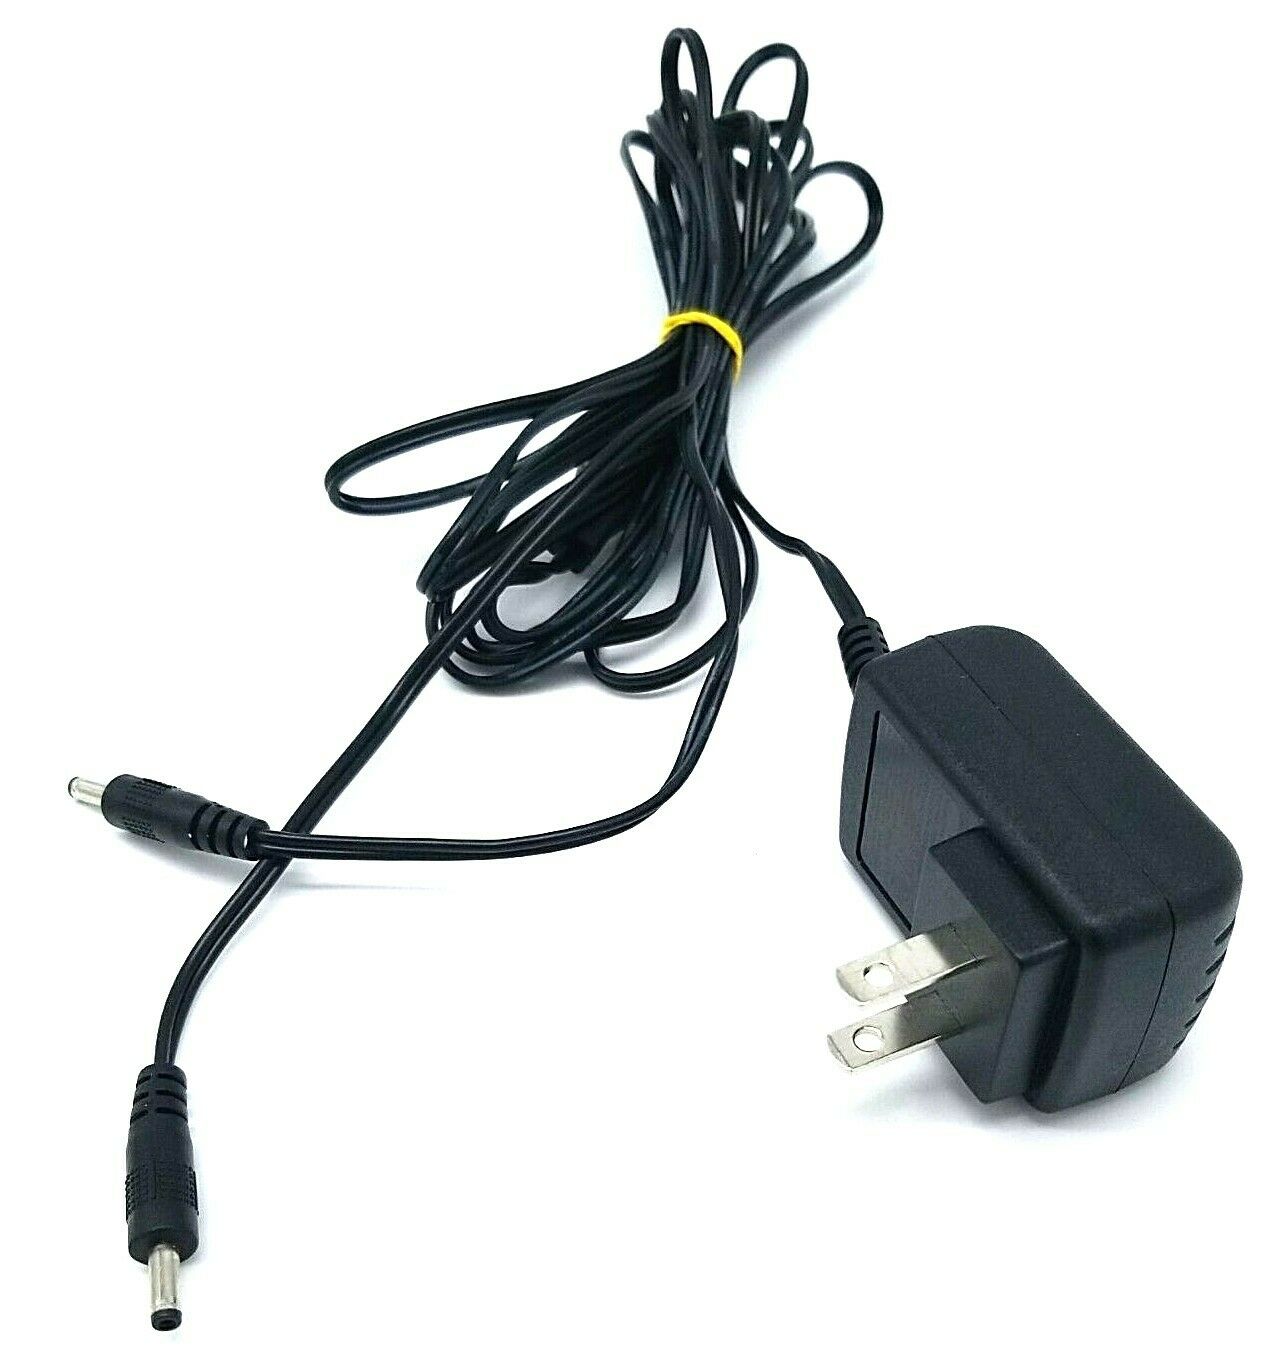 SHENZHEN tpa-99b050100uw01 AC/DC Power Supply Adapter Output 5V DUAL output Type: AC/DC Adapter Features: new MPN: